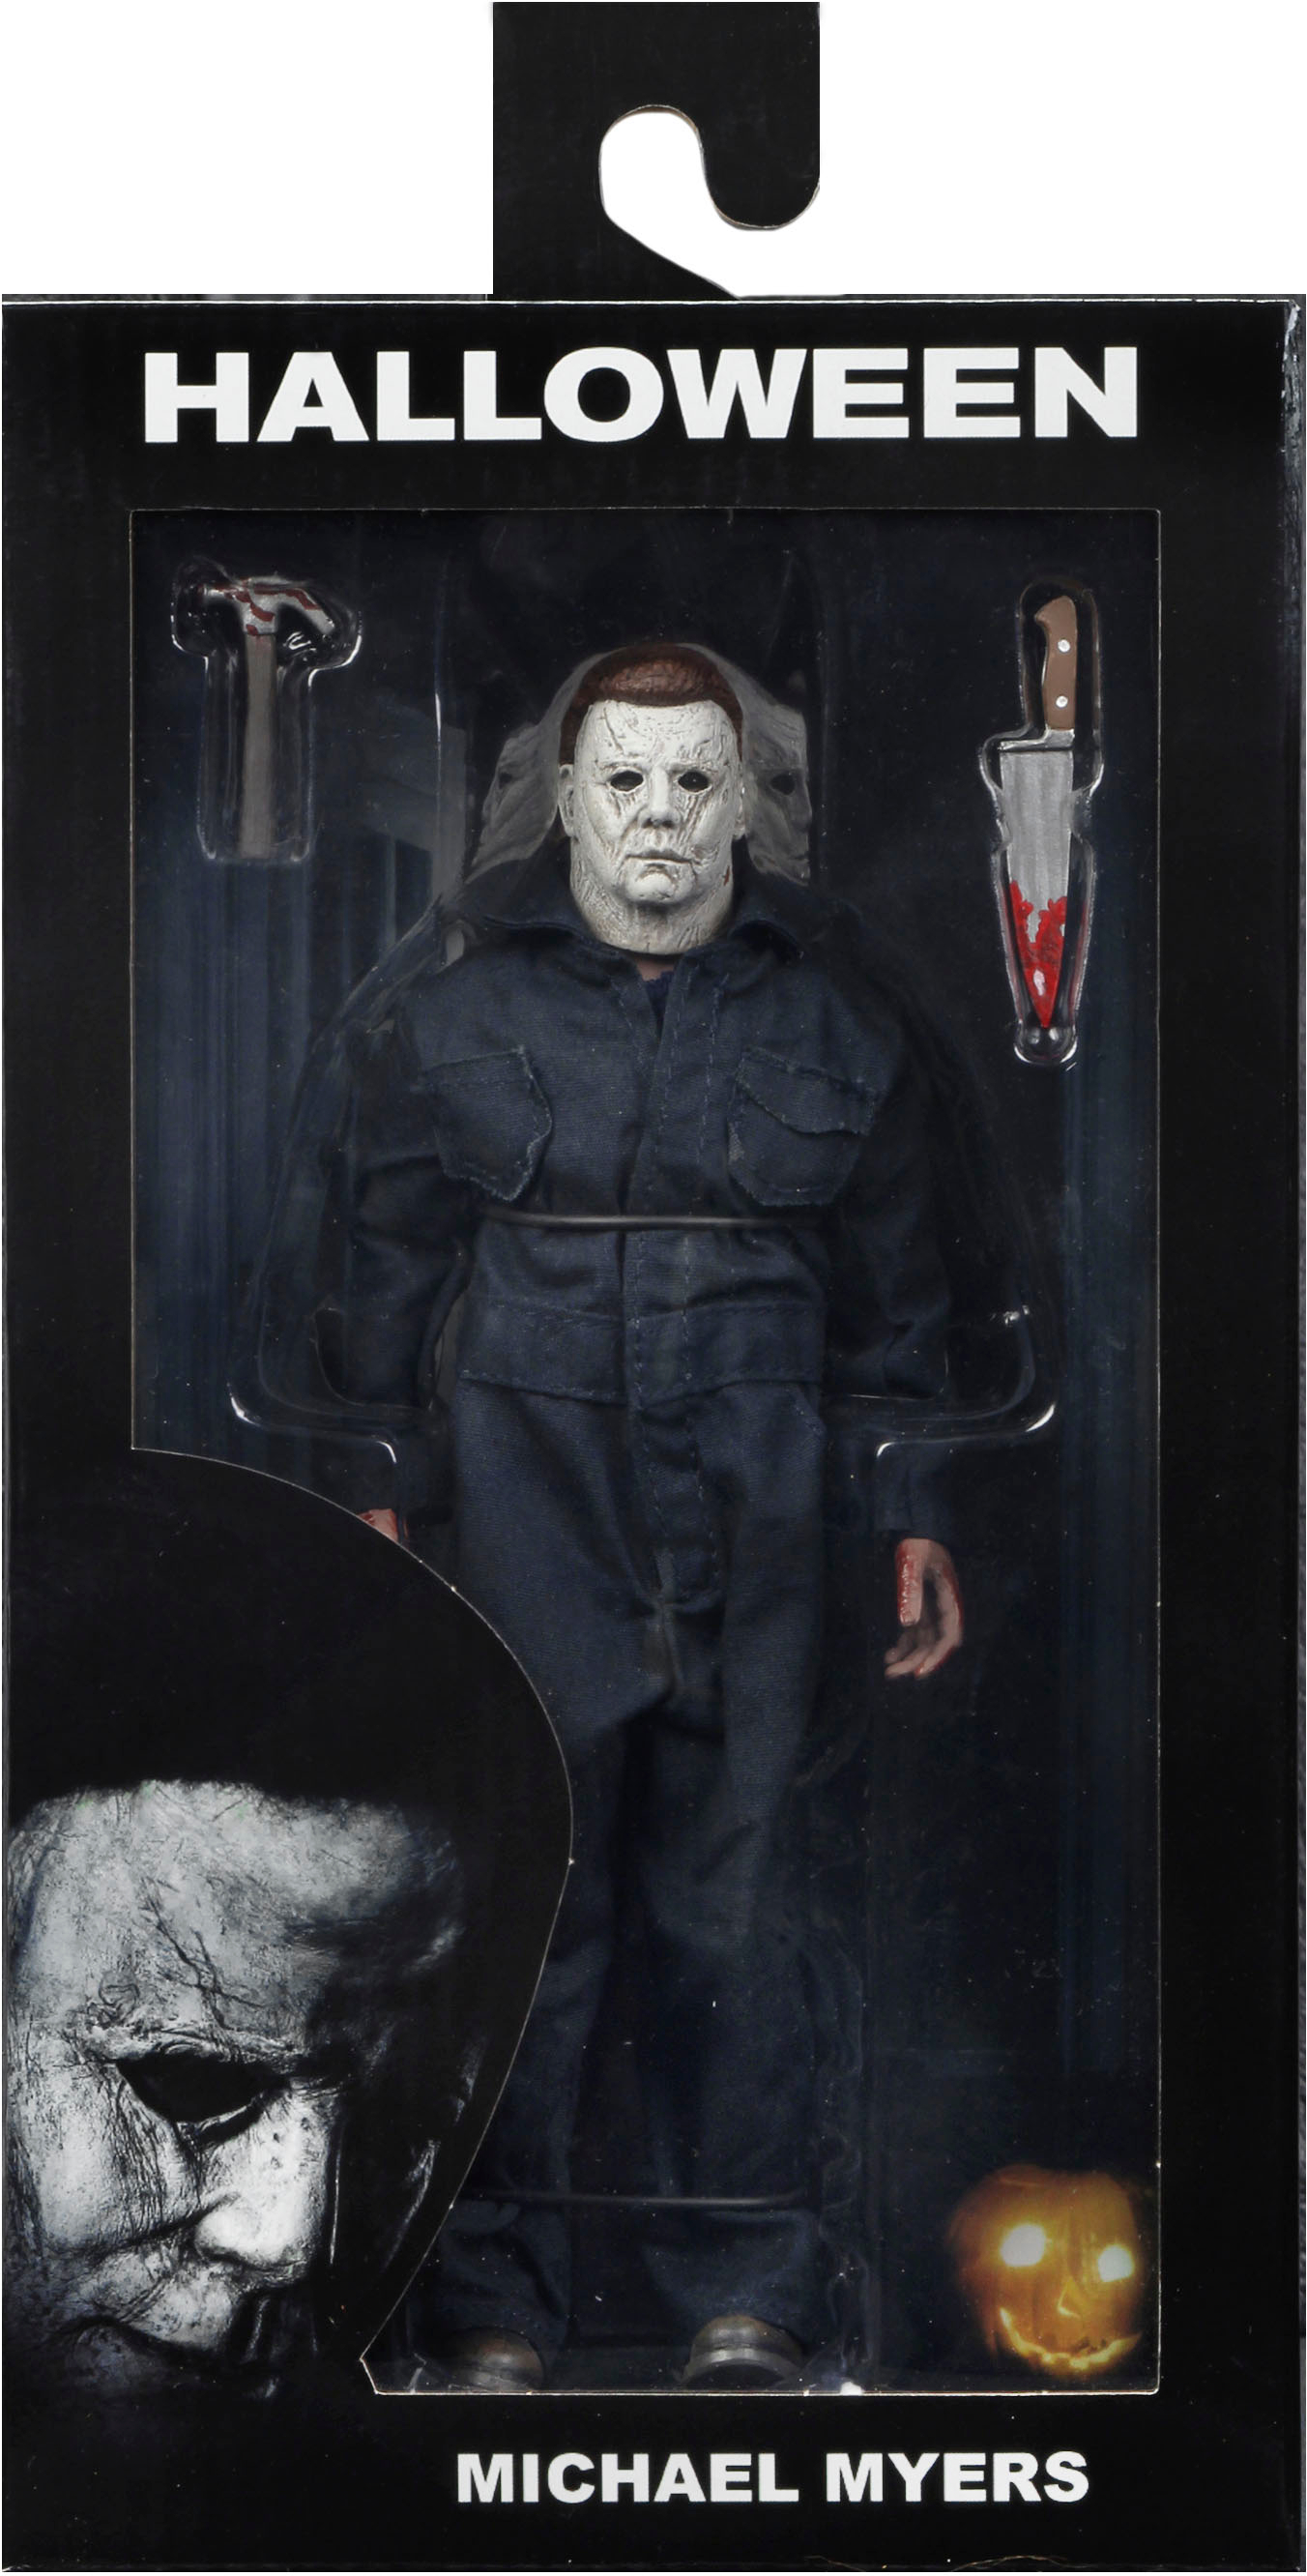 NECA Ghost Face 8” Clothed Action Figure – Ghost Face 41373 - Best Buy